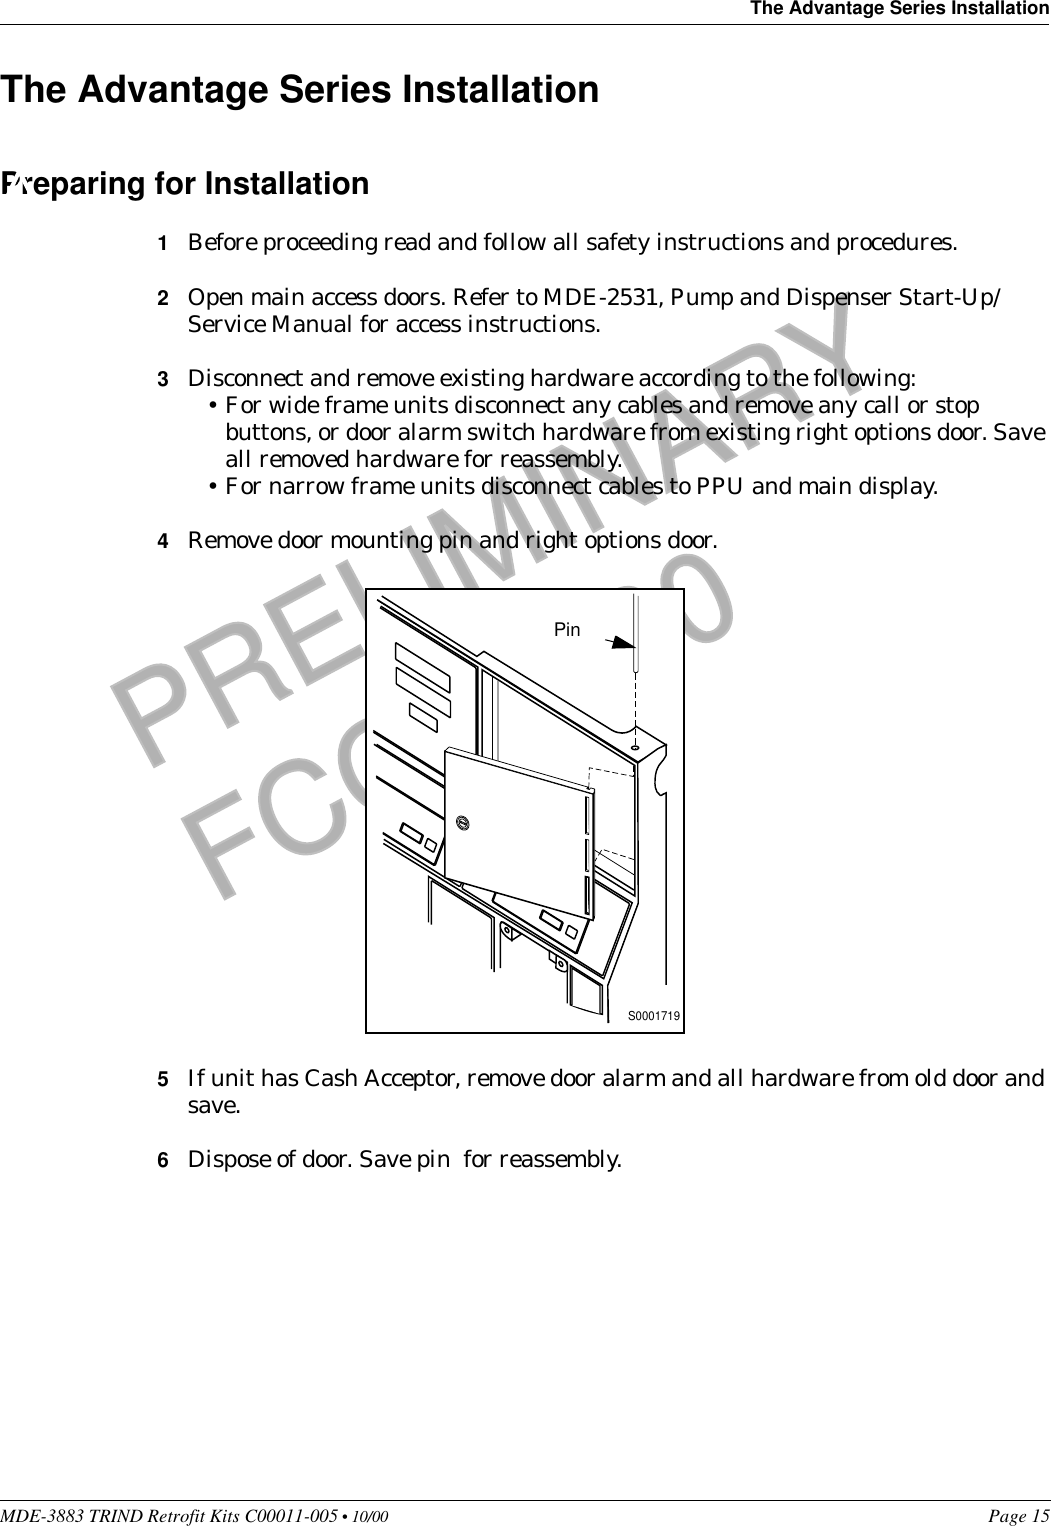 MDE-3883 TRIND Retrofit Kits C00011-005 • 10/00   Page 15The Advantage Series InstallationPRELIMINARYFCC 11/30The Advantage Series InstallationPreparing for Installation1Before proceeding read and follow all safety instructions and procedures.2Open main access doors. Refer to MDE-2531, Pump and Dispenser Start-Up/Service Manual for access instructions. 3Disconnect and remove existing hardware according to the following:•For wide frame units disconnect any cables and remove any call or stop buttons, or door alarm switch hardware from existing right options door. Save all removed hardware for reassembly.•For narrow frame units disconnect cables to PPU and main display.4Remove door mounting pin and right options door.5If unit has Cash Acceptor, remove door alarm and all hardware from old door and save.6Dispose of door. Save pin  for reassembly.S0001719Pin